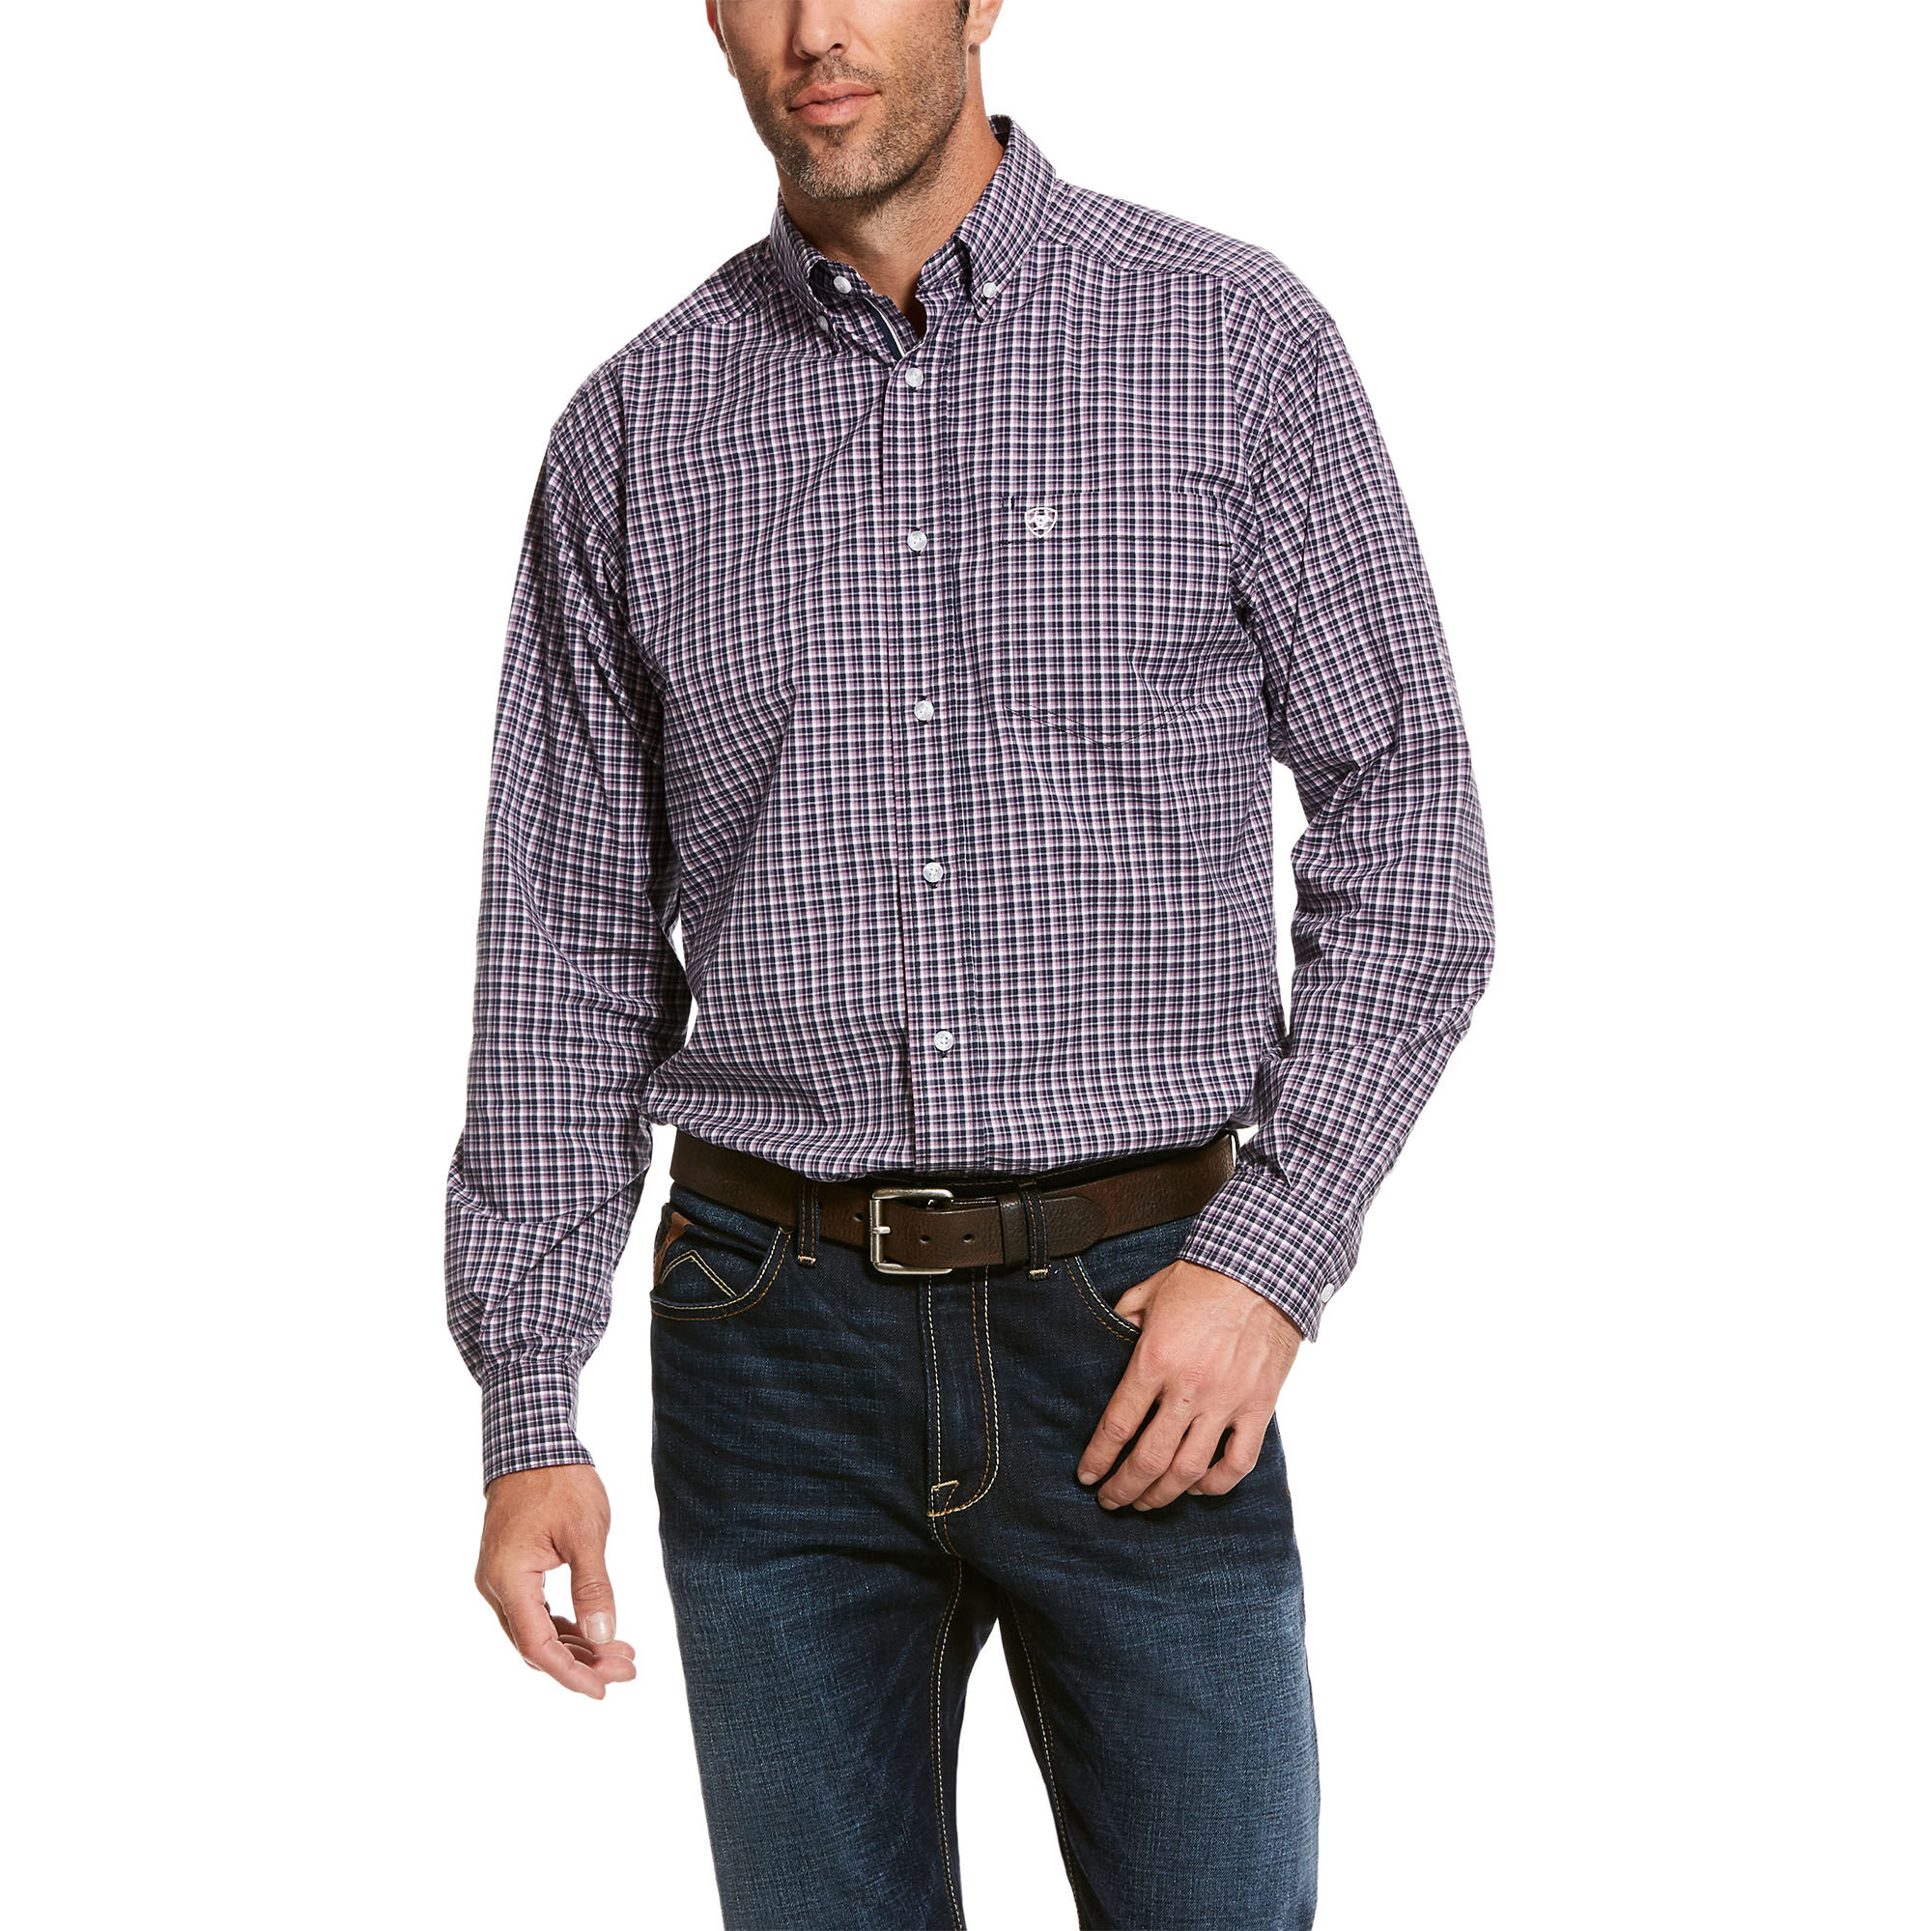 Men's Western Clothing Clearance | Ariat